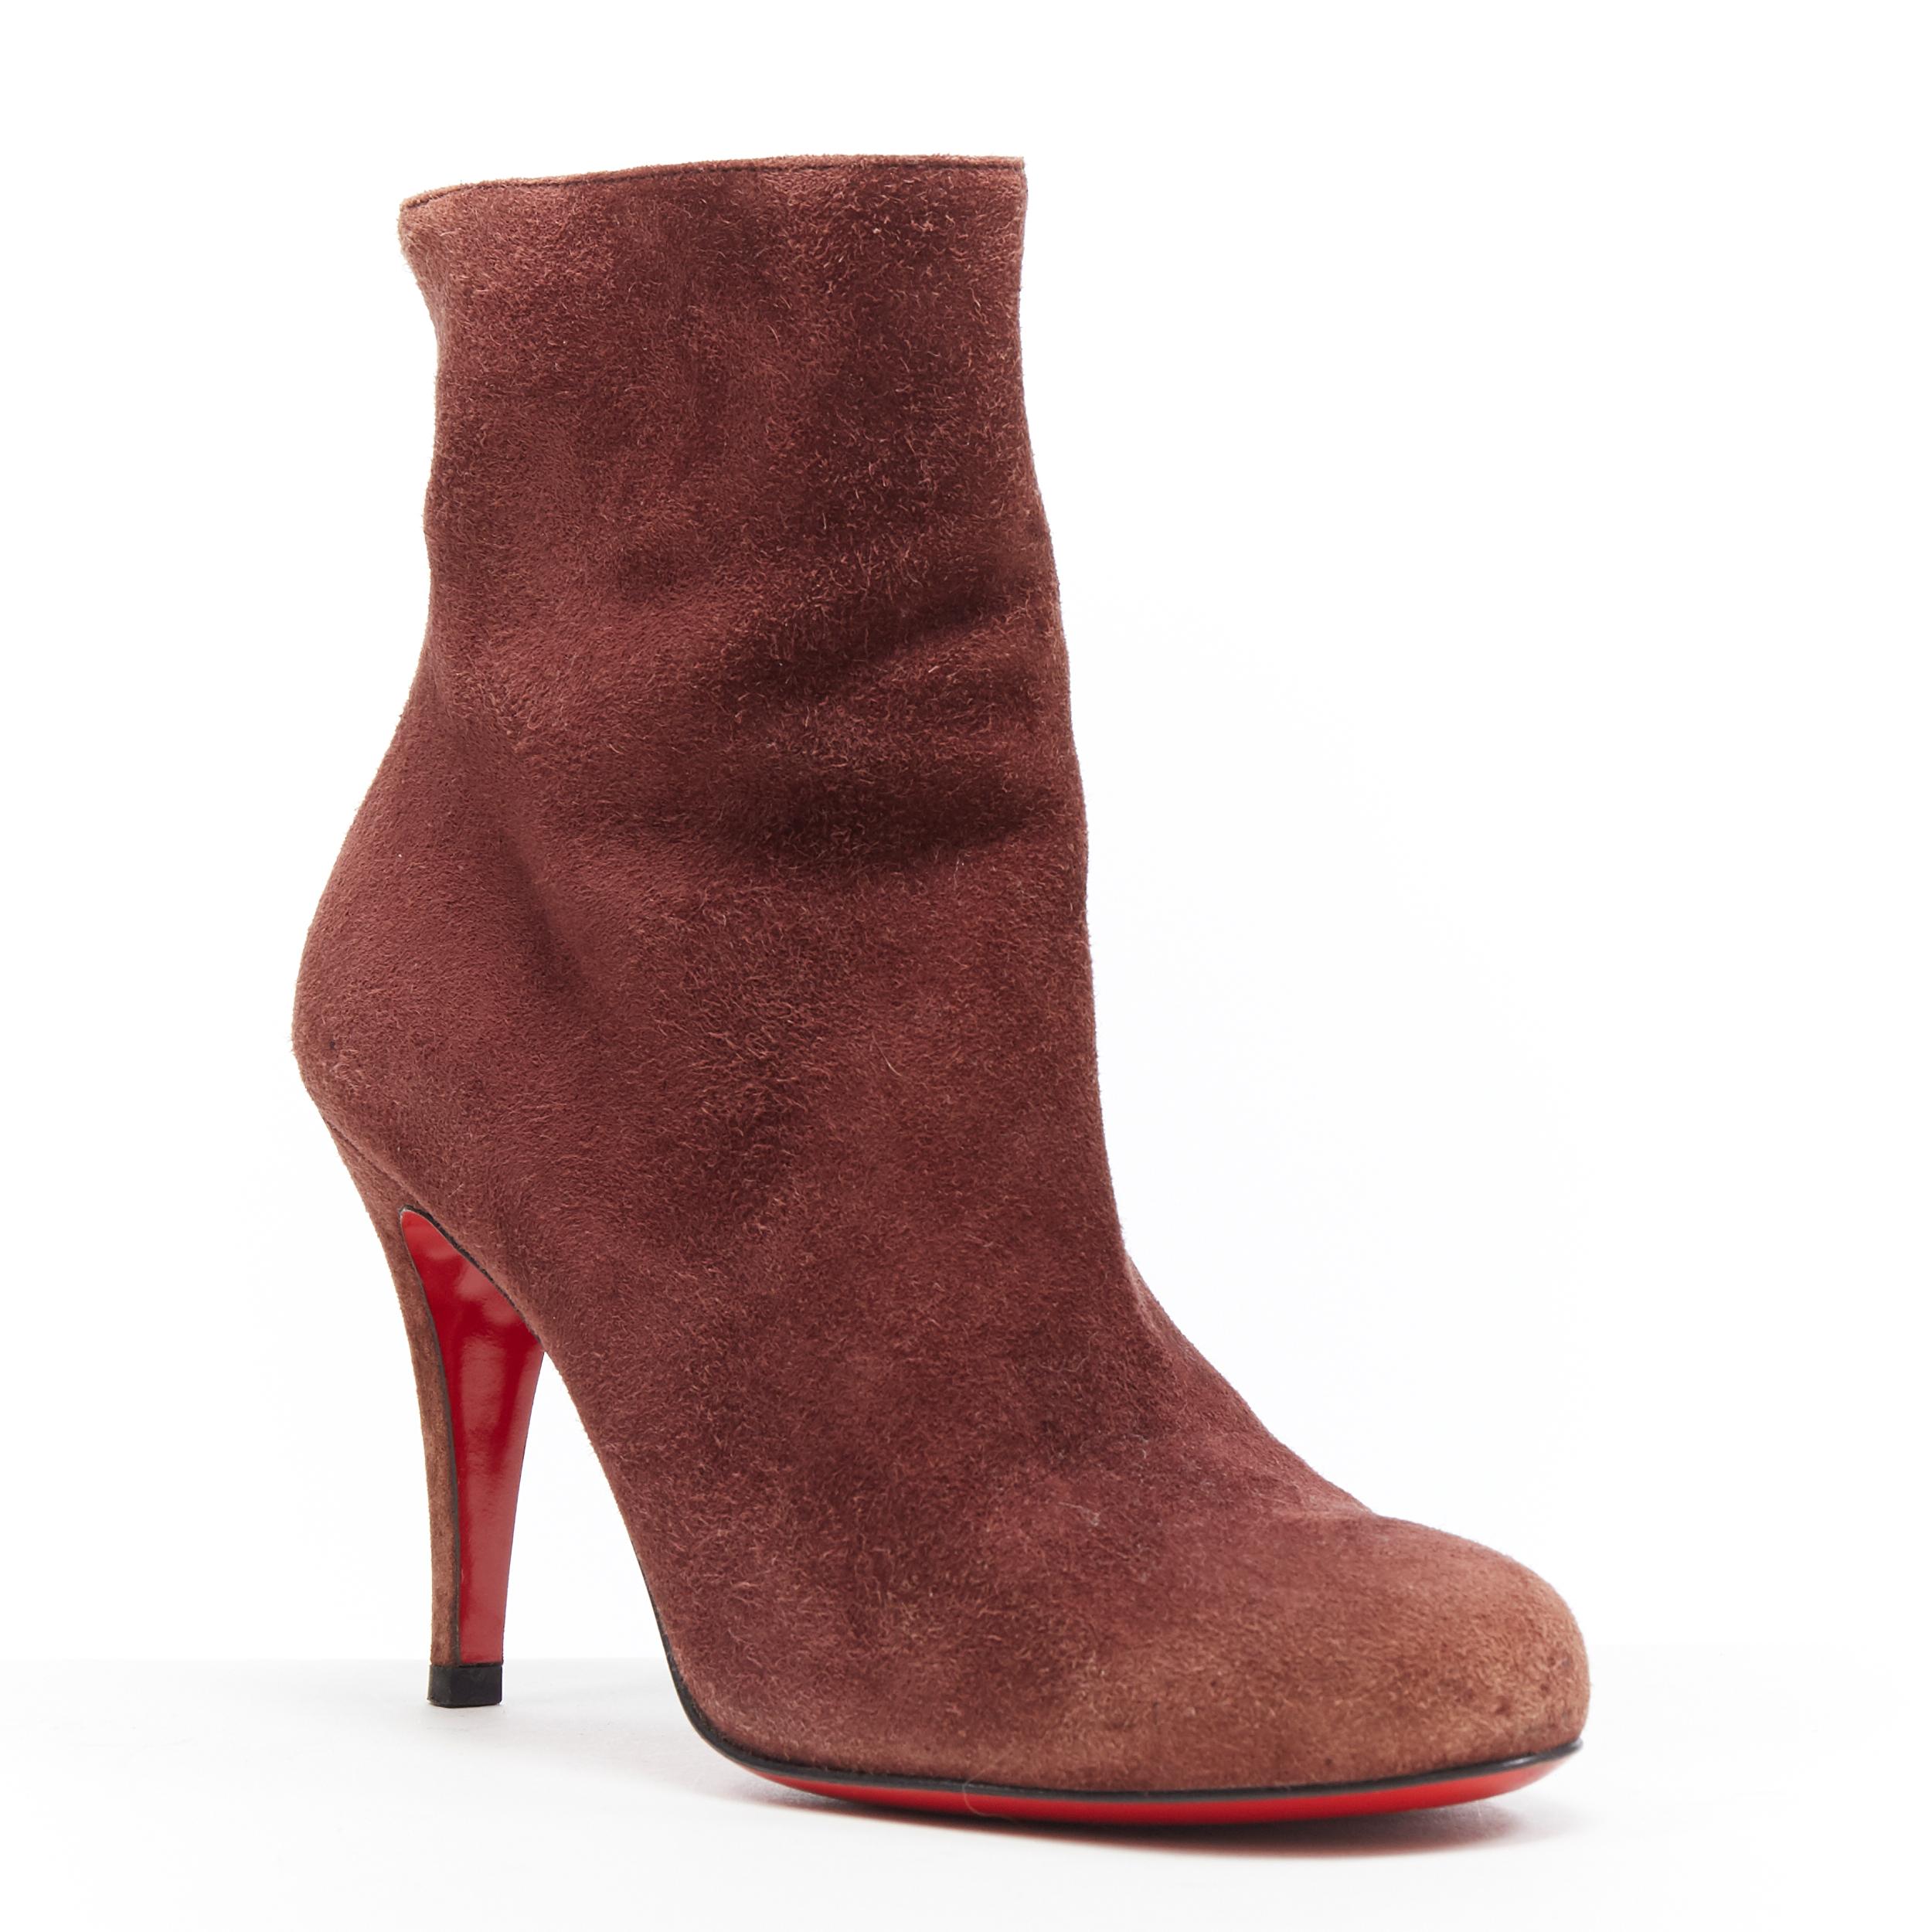 CHRISTIAN LOUBOUTIN Eloise 85 brown suede round toe slim heel ankle bootie EU36
Brand: Christian Louboutin
Designer: Christian Louboutin
Model Name / Style: Eloise 85
Material: Suede
Color: Brown
Pattern: Solid
Closure: Zip
Lining material: